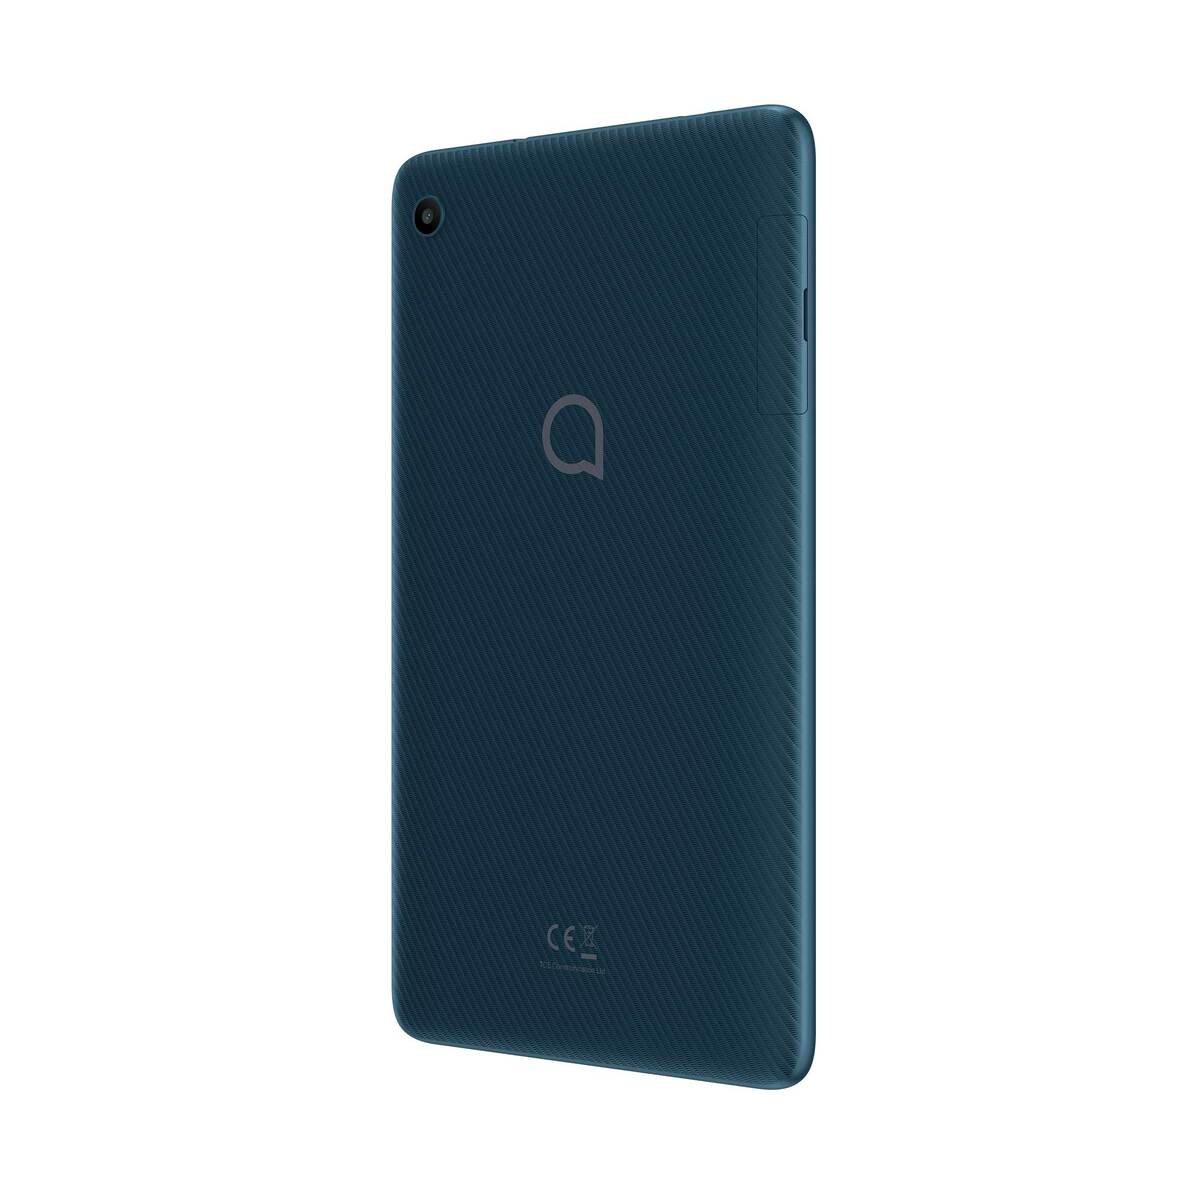 Alcatel Tablet 1T 7 9013T, 4G, Quad-core, 1GB RAM, 16GB Memory, 7 inches Display, Android, Agate Green